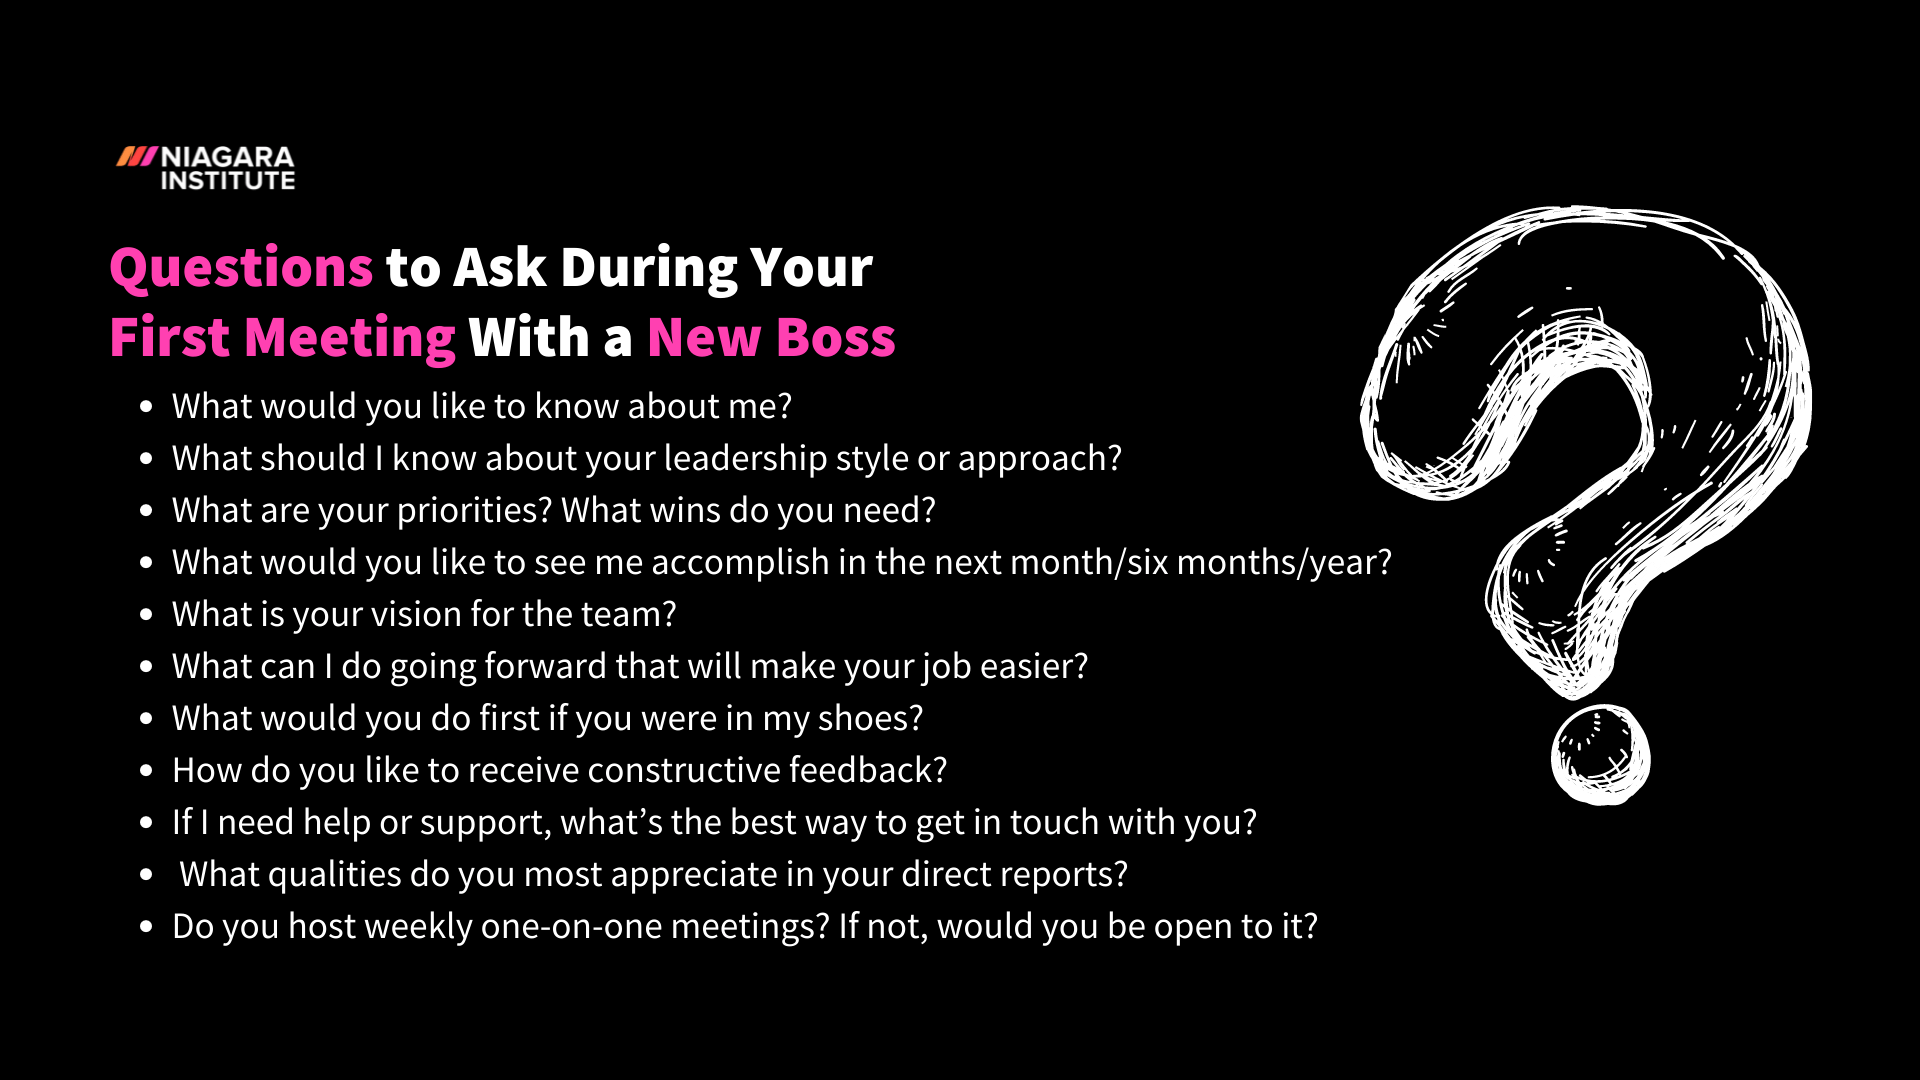 Questions to Ask During Your First Meeting With a New Boss